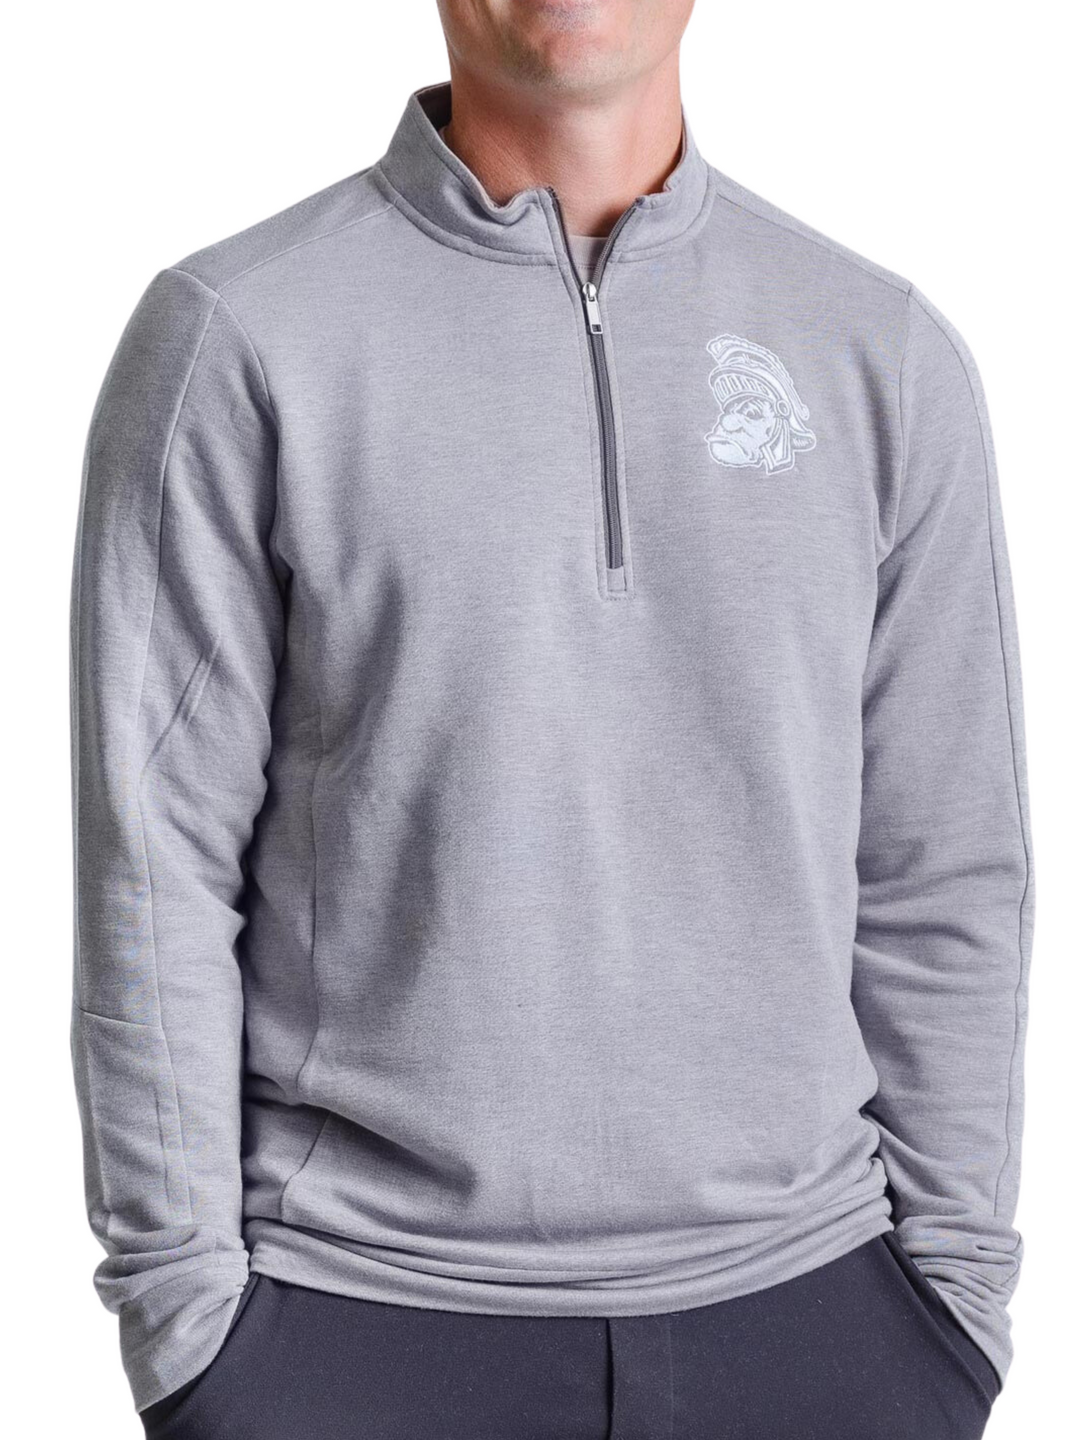 Michigan State University Embroidered Gruff Sparty Grey OGIO Quarter Zip Pullover Sweater